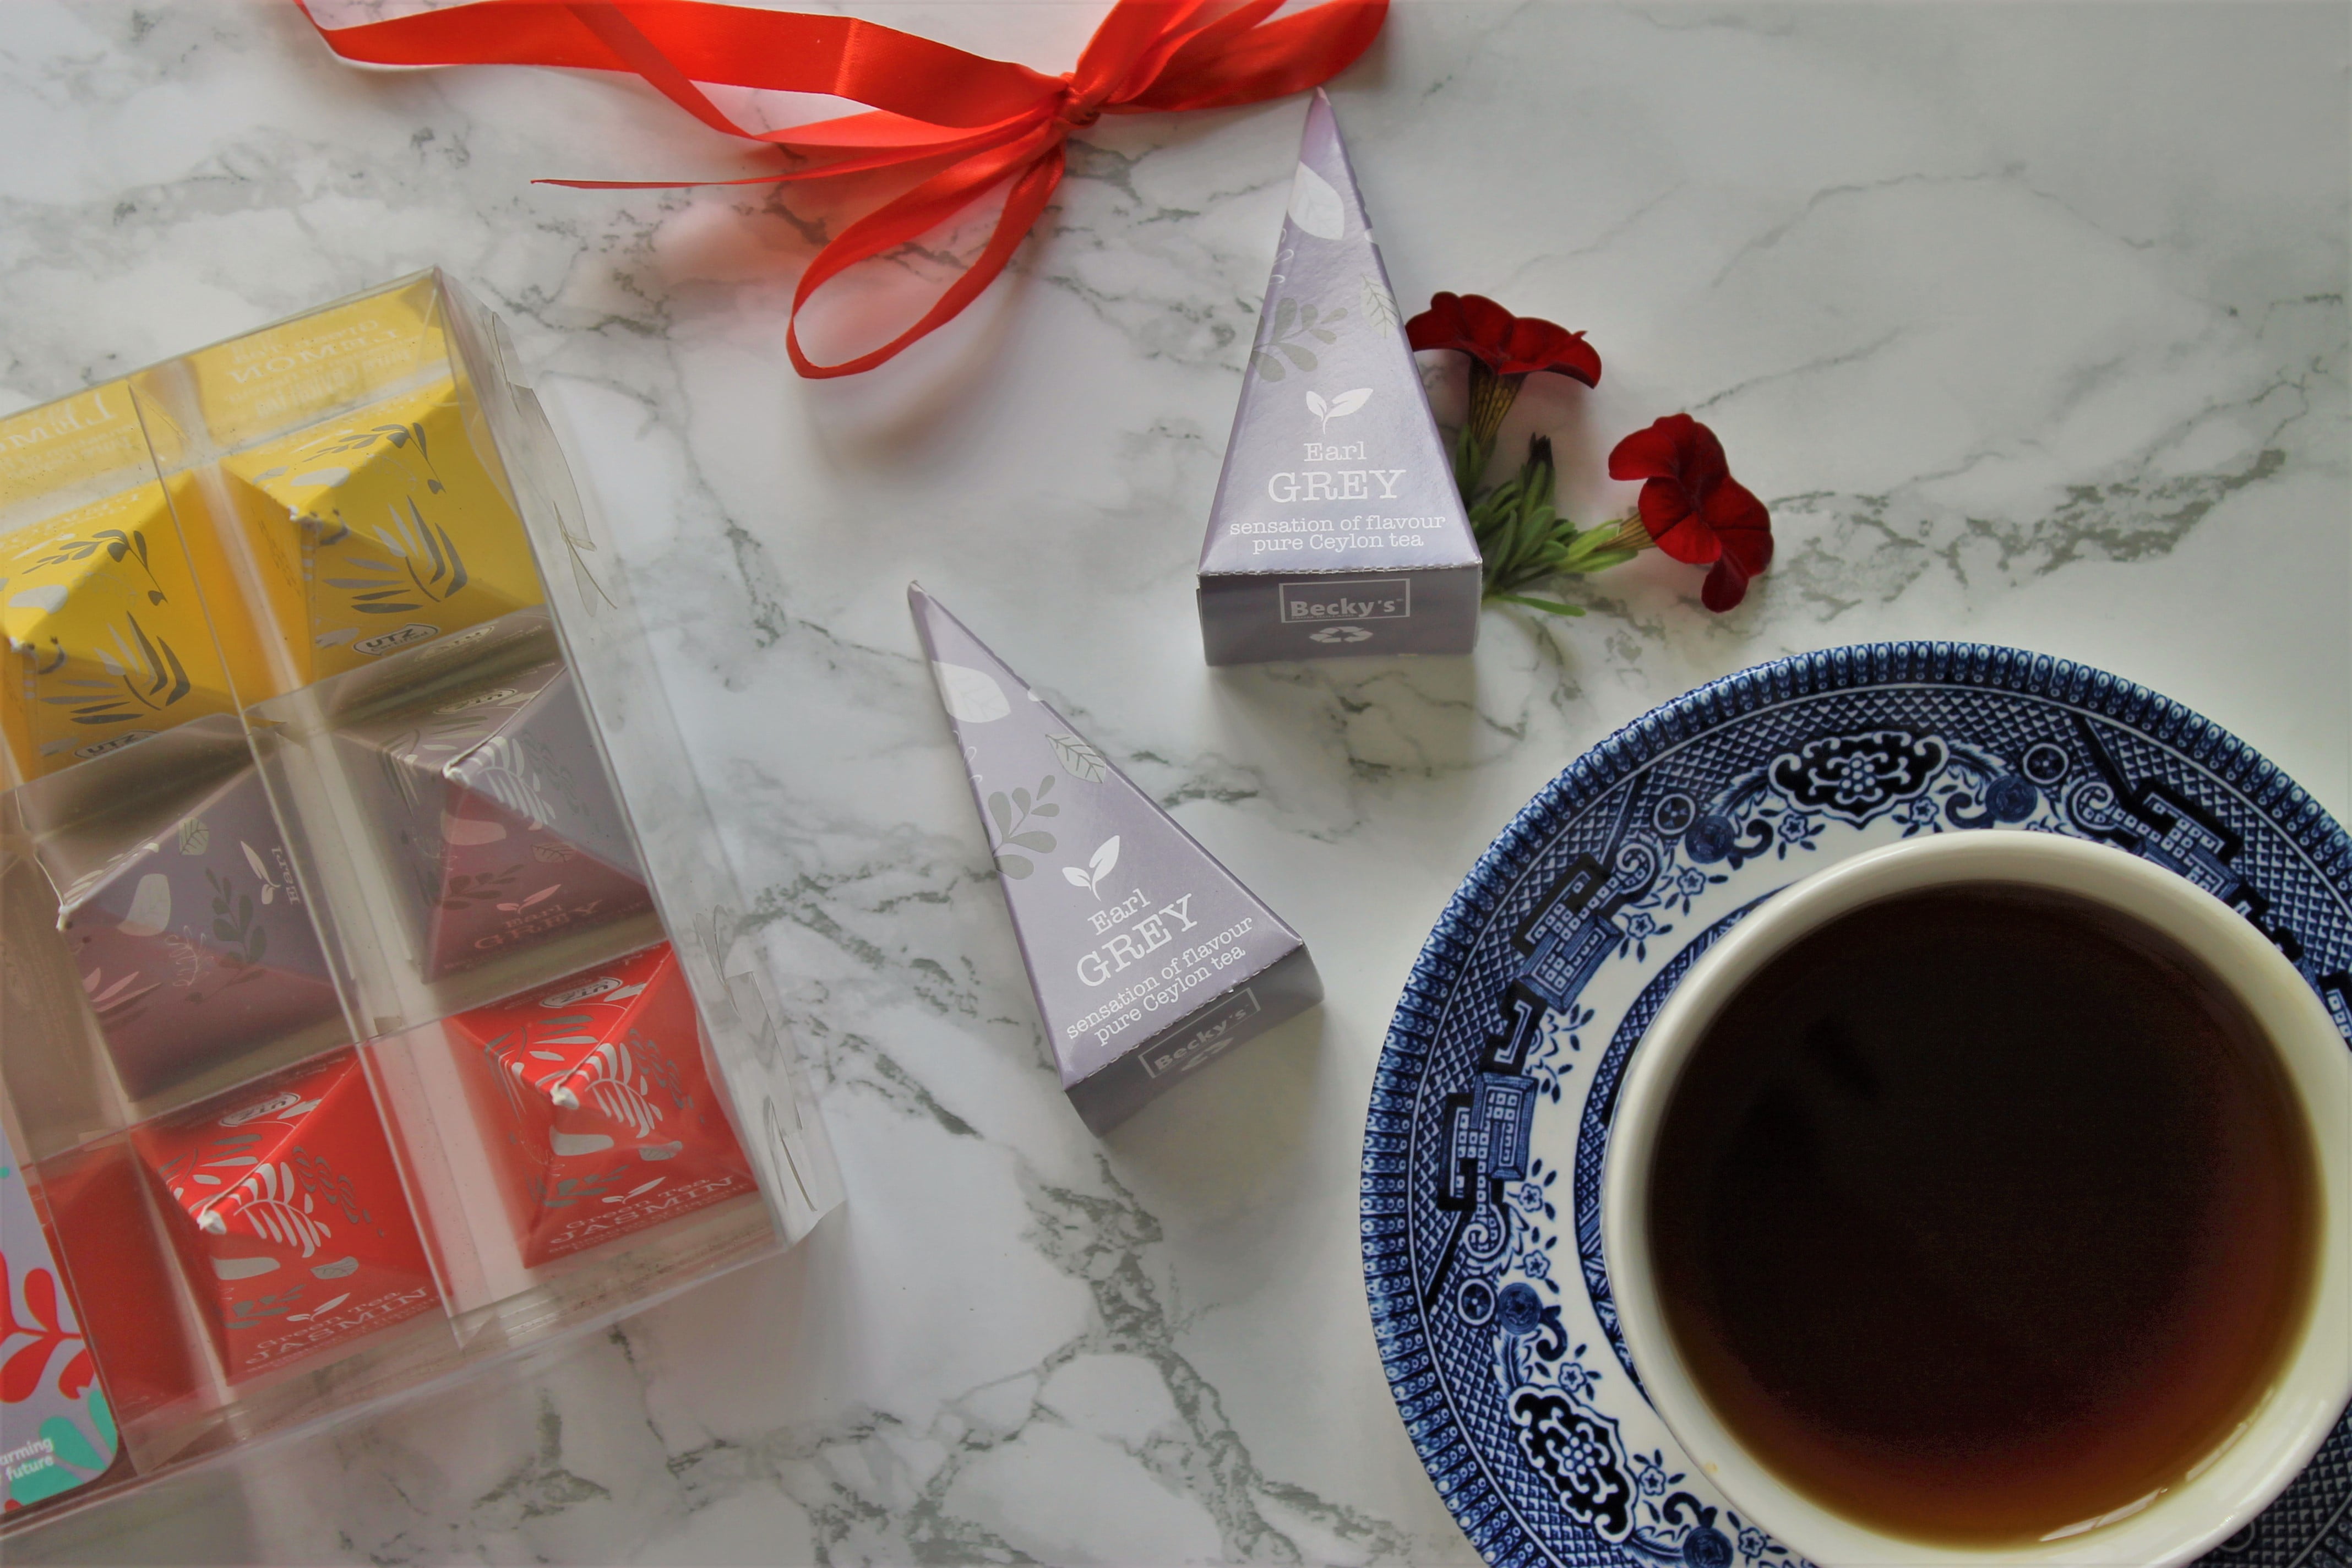 becky's from holland earl grey tea review